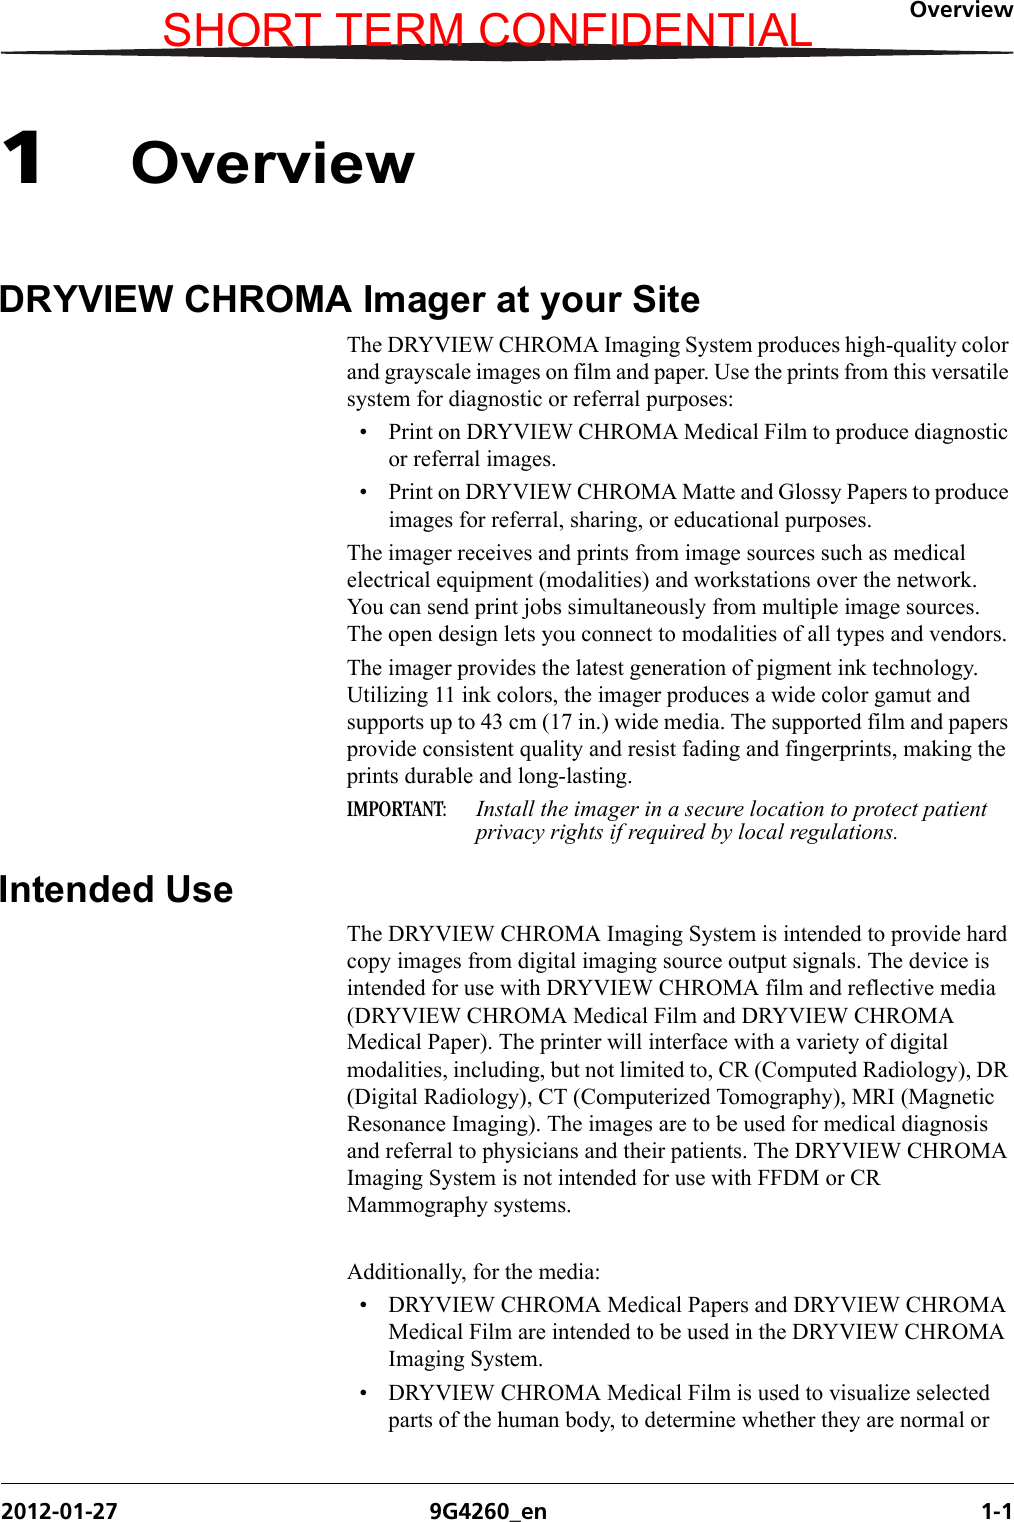 Overview2012-01-27 9G4260_en 1-11OverviewDRYVIEW CHROMA Imager at your SiteThe DRYVIEW CHROMA Imaging System produces high-quality color and grayscale images on film and paper. Use the prints from this versatile system for diagnostic or referral purposes: • Print on DRYVIEW CHROMA Medical Film to produce diagnostic or referral images.• Print on DRYVIEW CHROMA Matte and Glossy Papers to produce images for referral, sharing, or educational purposes.The imager receives and prints from image sources such as medical electrical equipment (modalities) and workstations over the network. You can send print jobs simultaneously from multiple image sources. The open design lets you connect to modalities of all types and vendors.The imager provides the latest generation of pigment ink technology. Utilizing 11 ink colors, the imager produces a wide color gamut and supports up to 43 cm (17 in.) wide media. The supported film and papers provide consistent quality and resist fading and fingerprints, making the prints durable and long-lasting.IMPORTANT:  Install the imager in a secure location to protect patient privacy rights if required by local regulations.Intended UseThe DRYVIEW CHROMA Imaging System is intended to provide hard copy images from digital imaging source output signals. The device is intended for use with DRYVIEW CHROMA film and reflective media (DRYVIEW CHROMA Medical Film and DRYVIEW CHROMA Medical Paper). The printer will interface with a variety of digital modalities, including, but not limited to, CR (Computed Radiology), DR (Digital Radiology), CT (Computerized Tomography), MRI (Magnetic Resonance Imaging). The images are to be used for medical diagnosis and referral to physicians and their patients. The DRYVIEW CHROMA Imaging System is not intended for use with FFDM or CR Mammography systems.Additionally, for the media:• DRYVIEW CHROMA Medical Papers and DRYVIEW CHROMA Medical Film are intended to be used in the DRYVIEW CHROMA Imaging System.• DRYVIEW CHROMA Medical Film is used to visualize selected parts of the human body, to determine whether they are normal or SHORT TERM CONFIDENTIAL